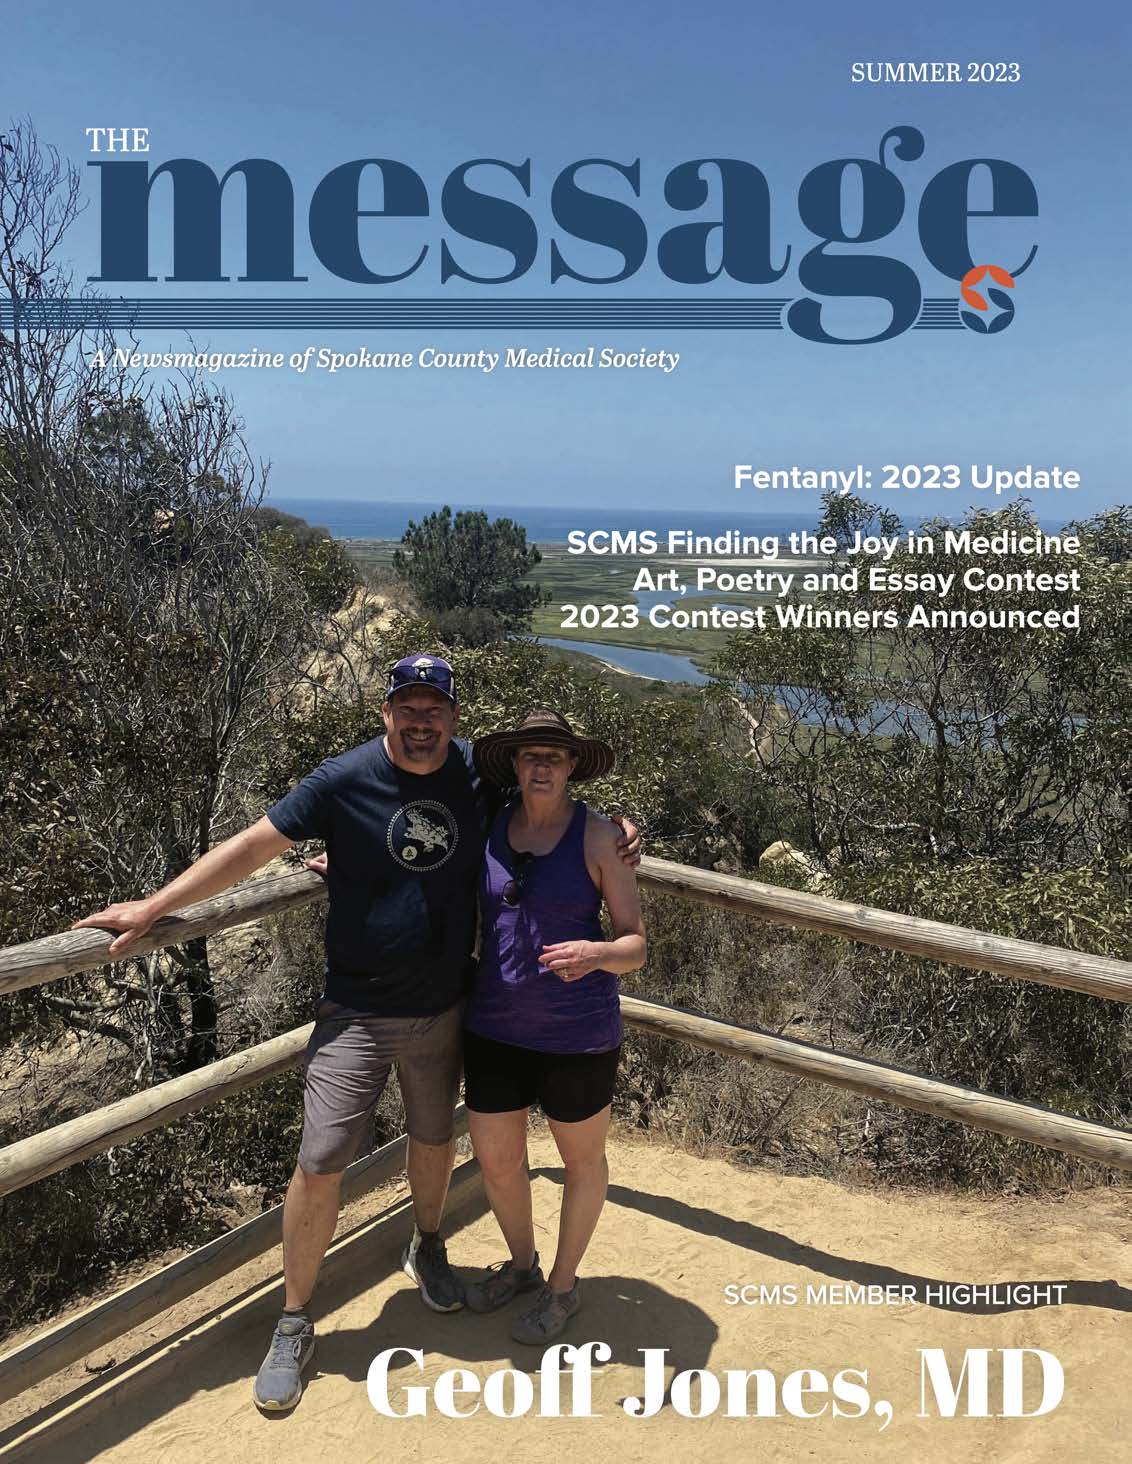 The Message - Summer 2023 COVER